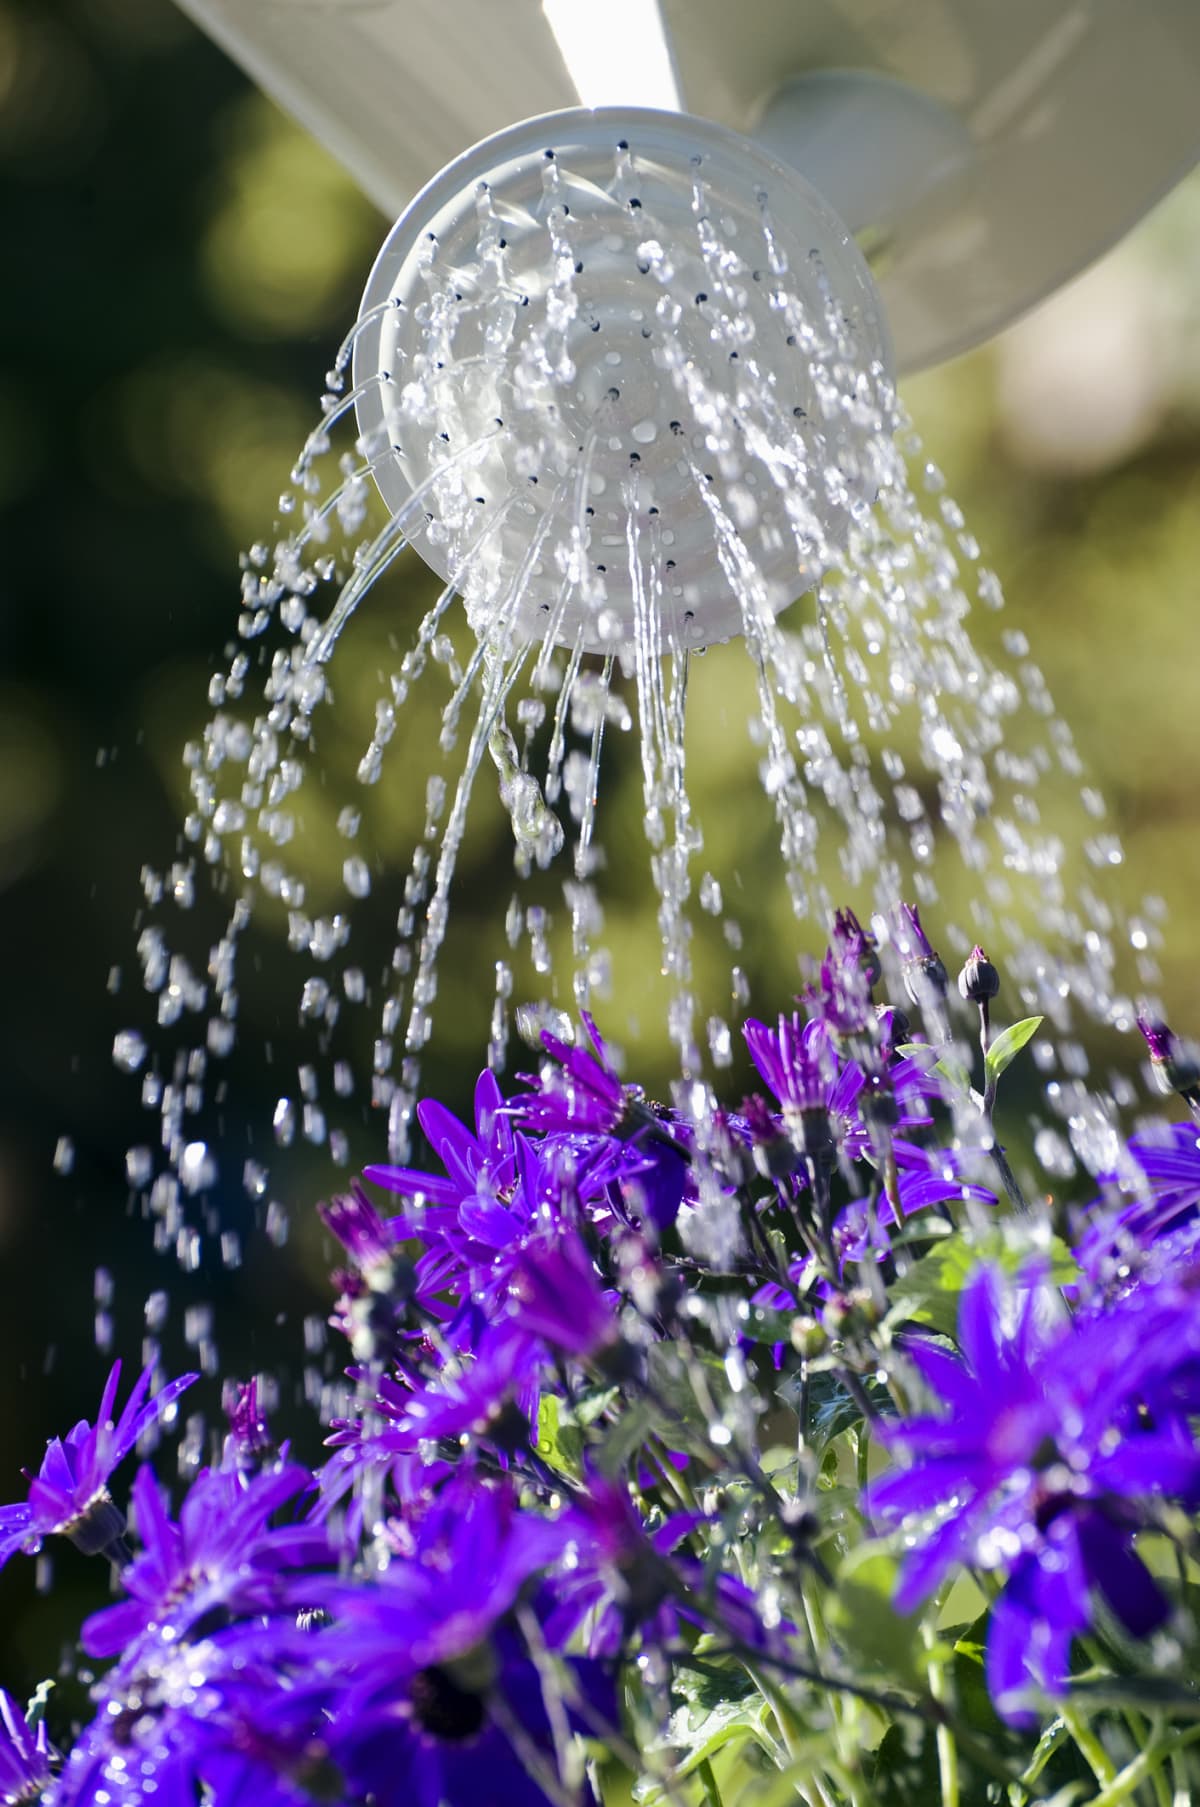 Watering purple flowers with a watering can